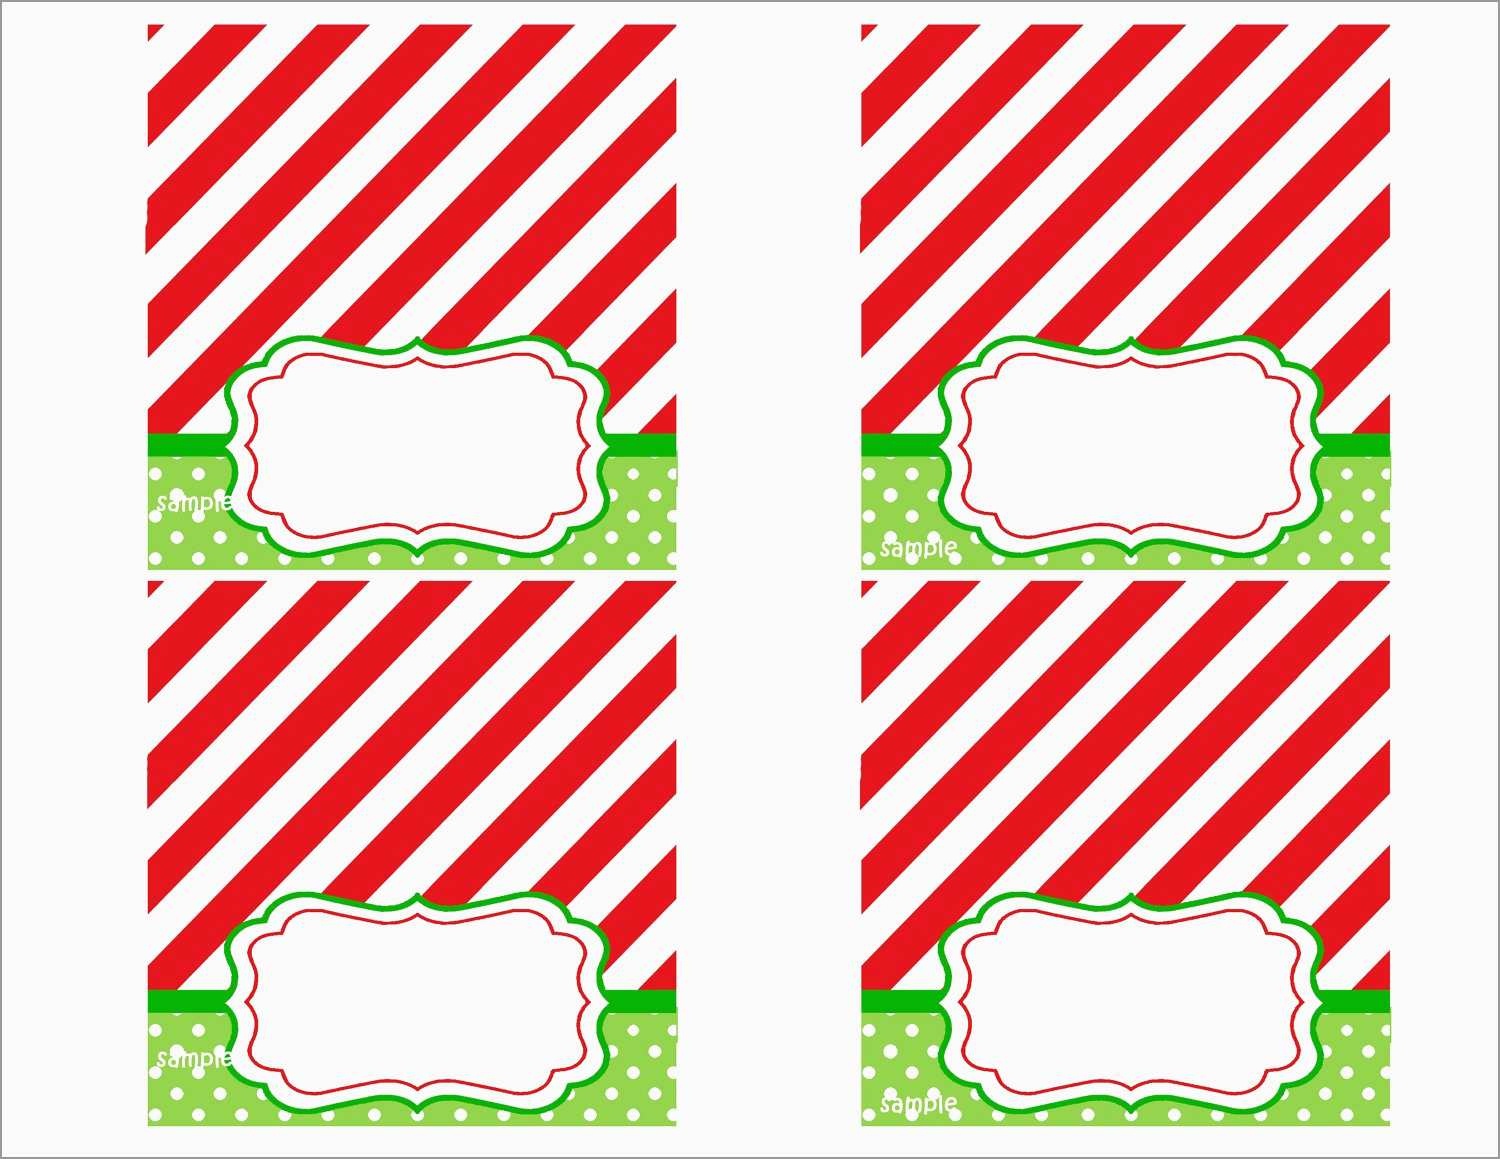 Awesome Free Printable Christmas Table Place Cards Template | Best - Free Printable Christmas Table Place Cards Template